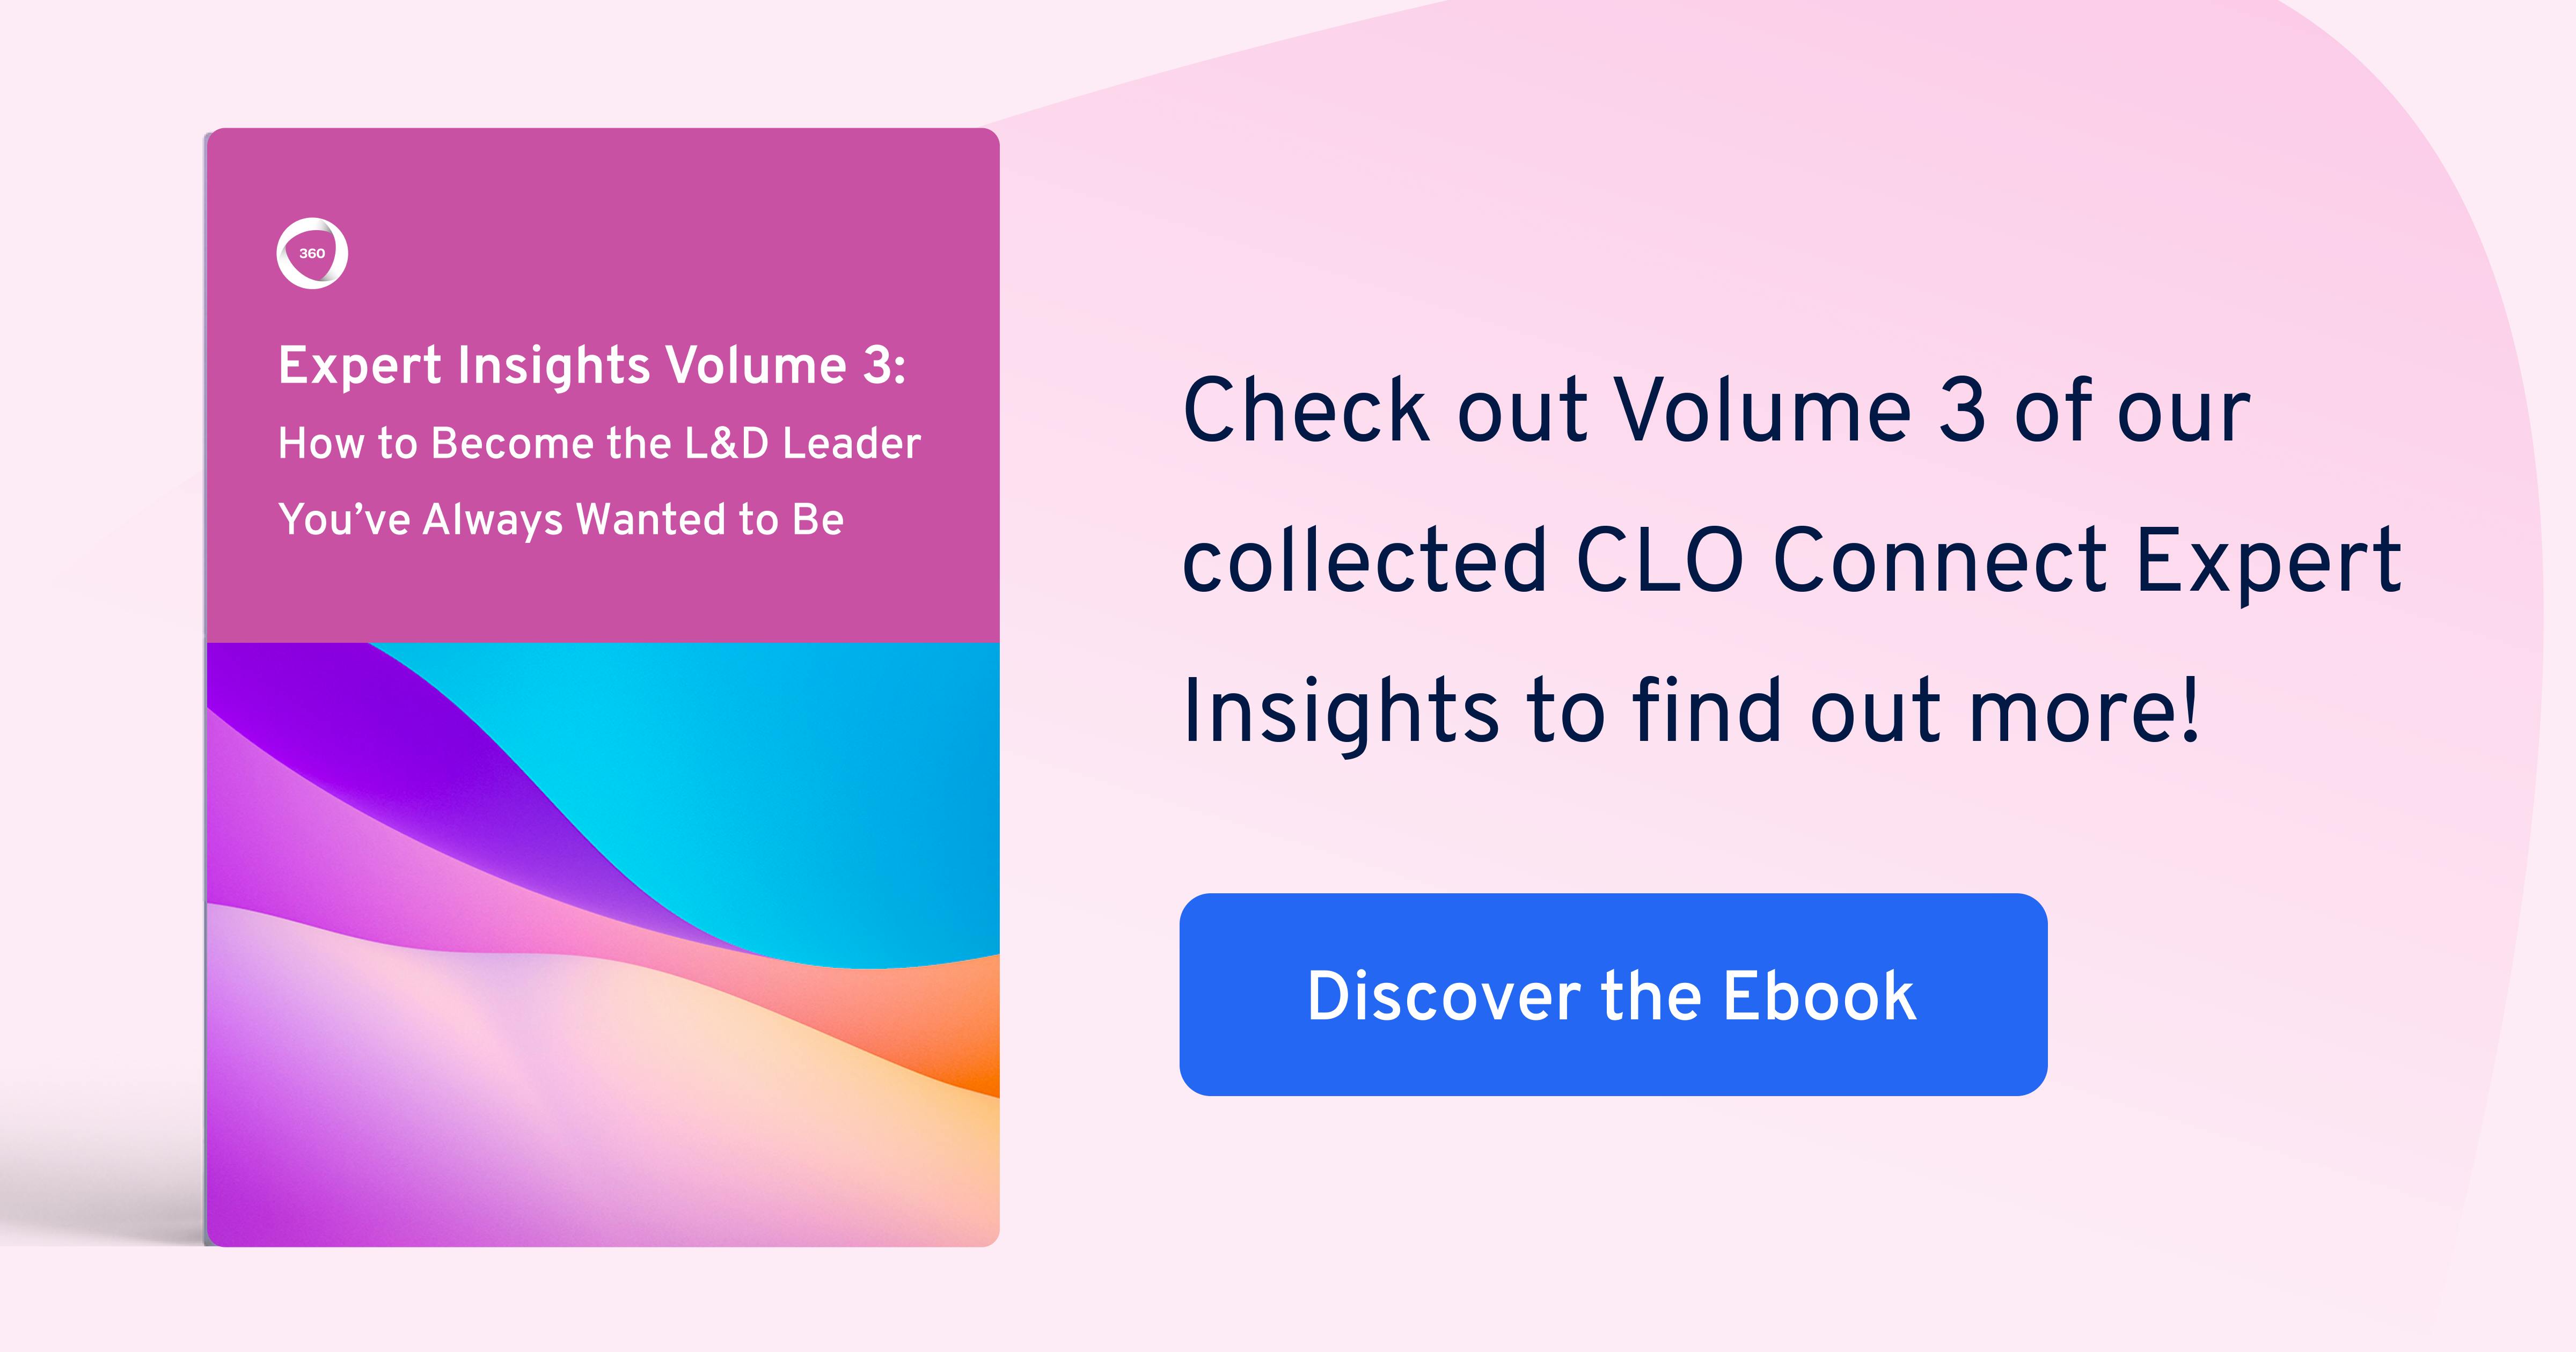 CLO Connect Volume 3 Expert Insights